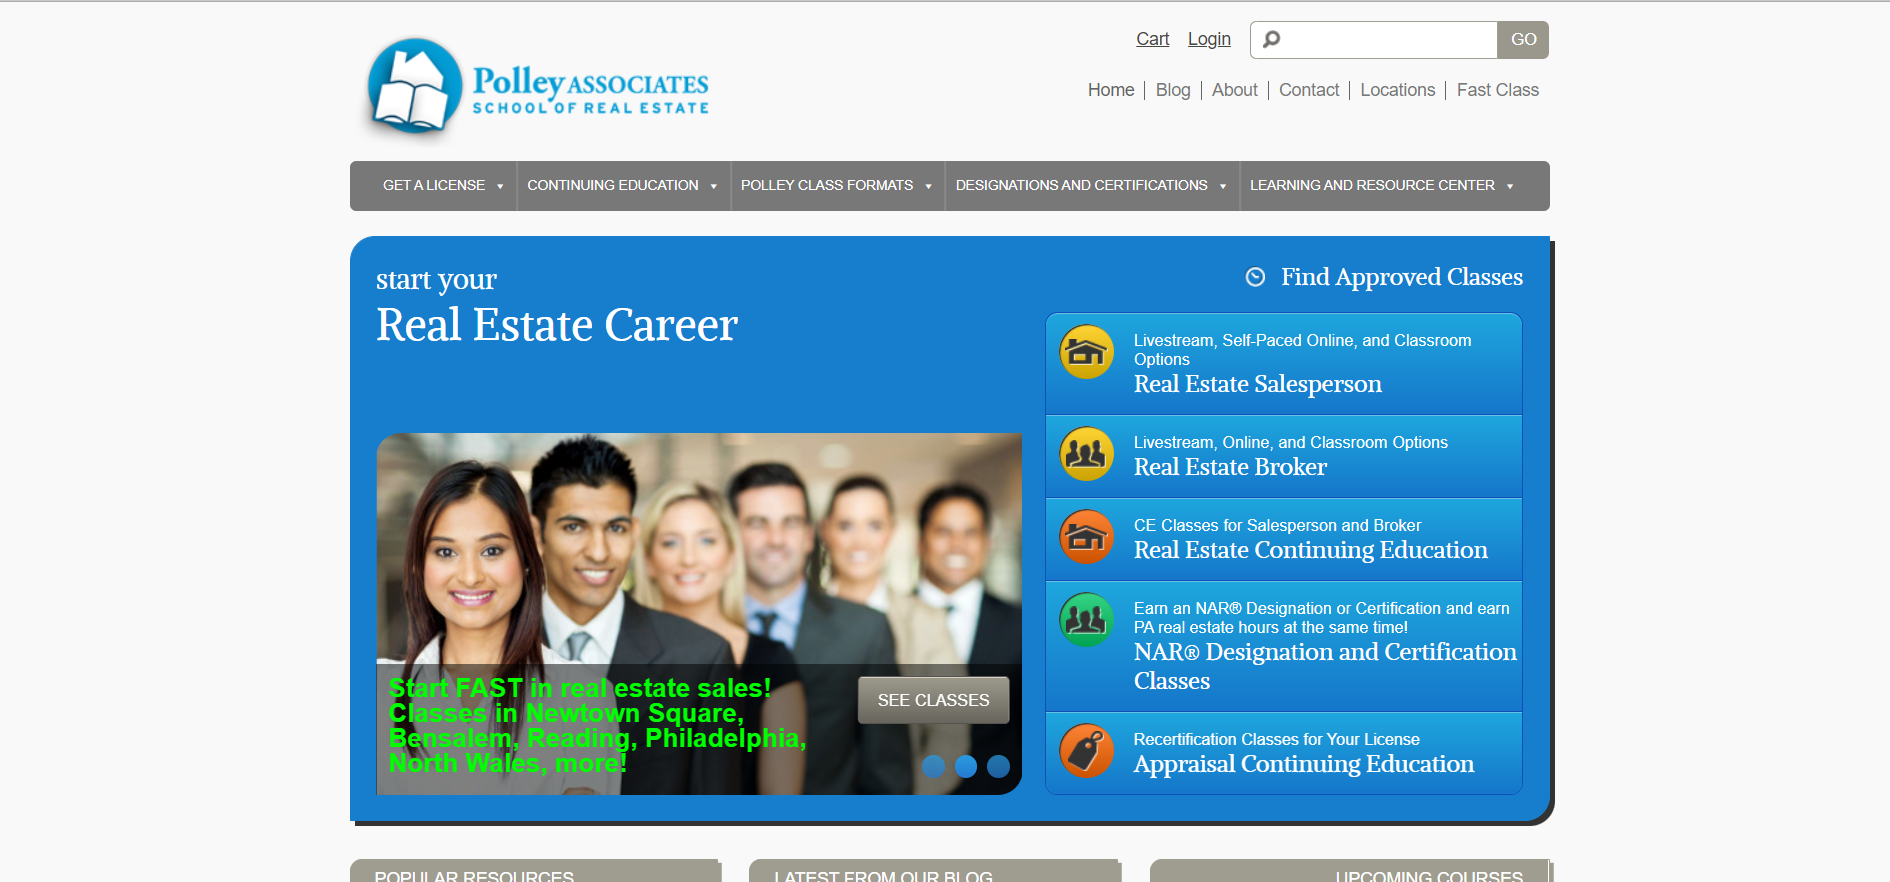 Advertisement for real estate courses from PolleyAssociates.